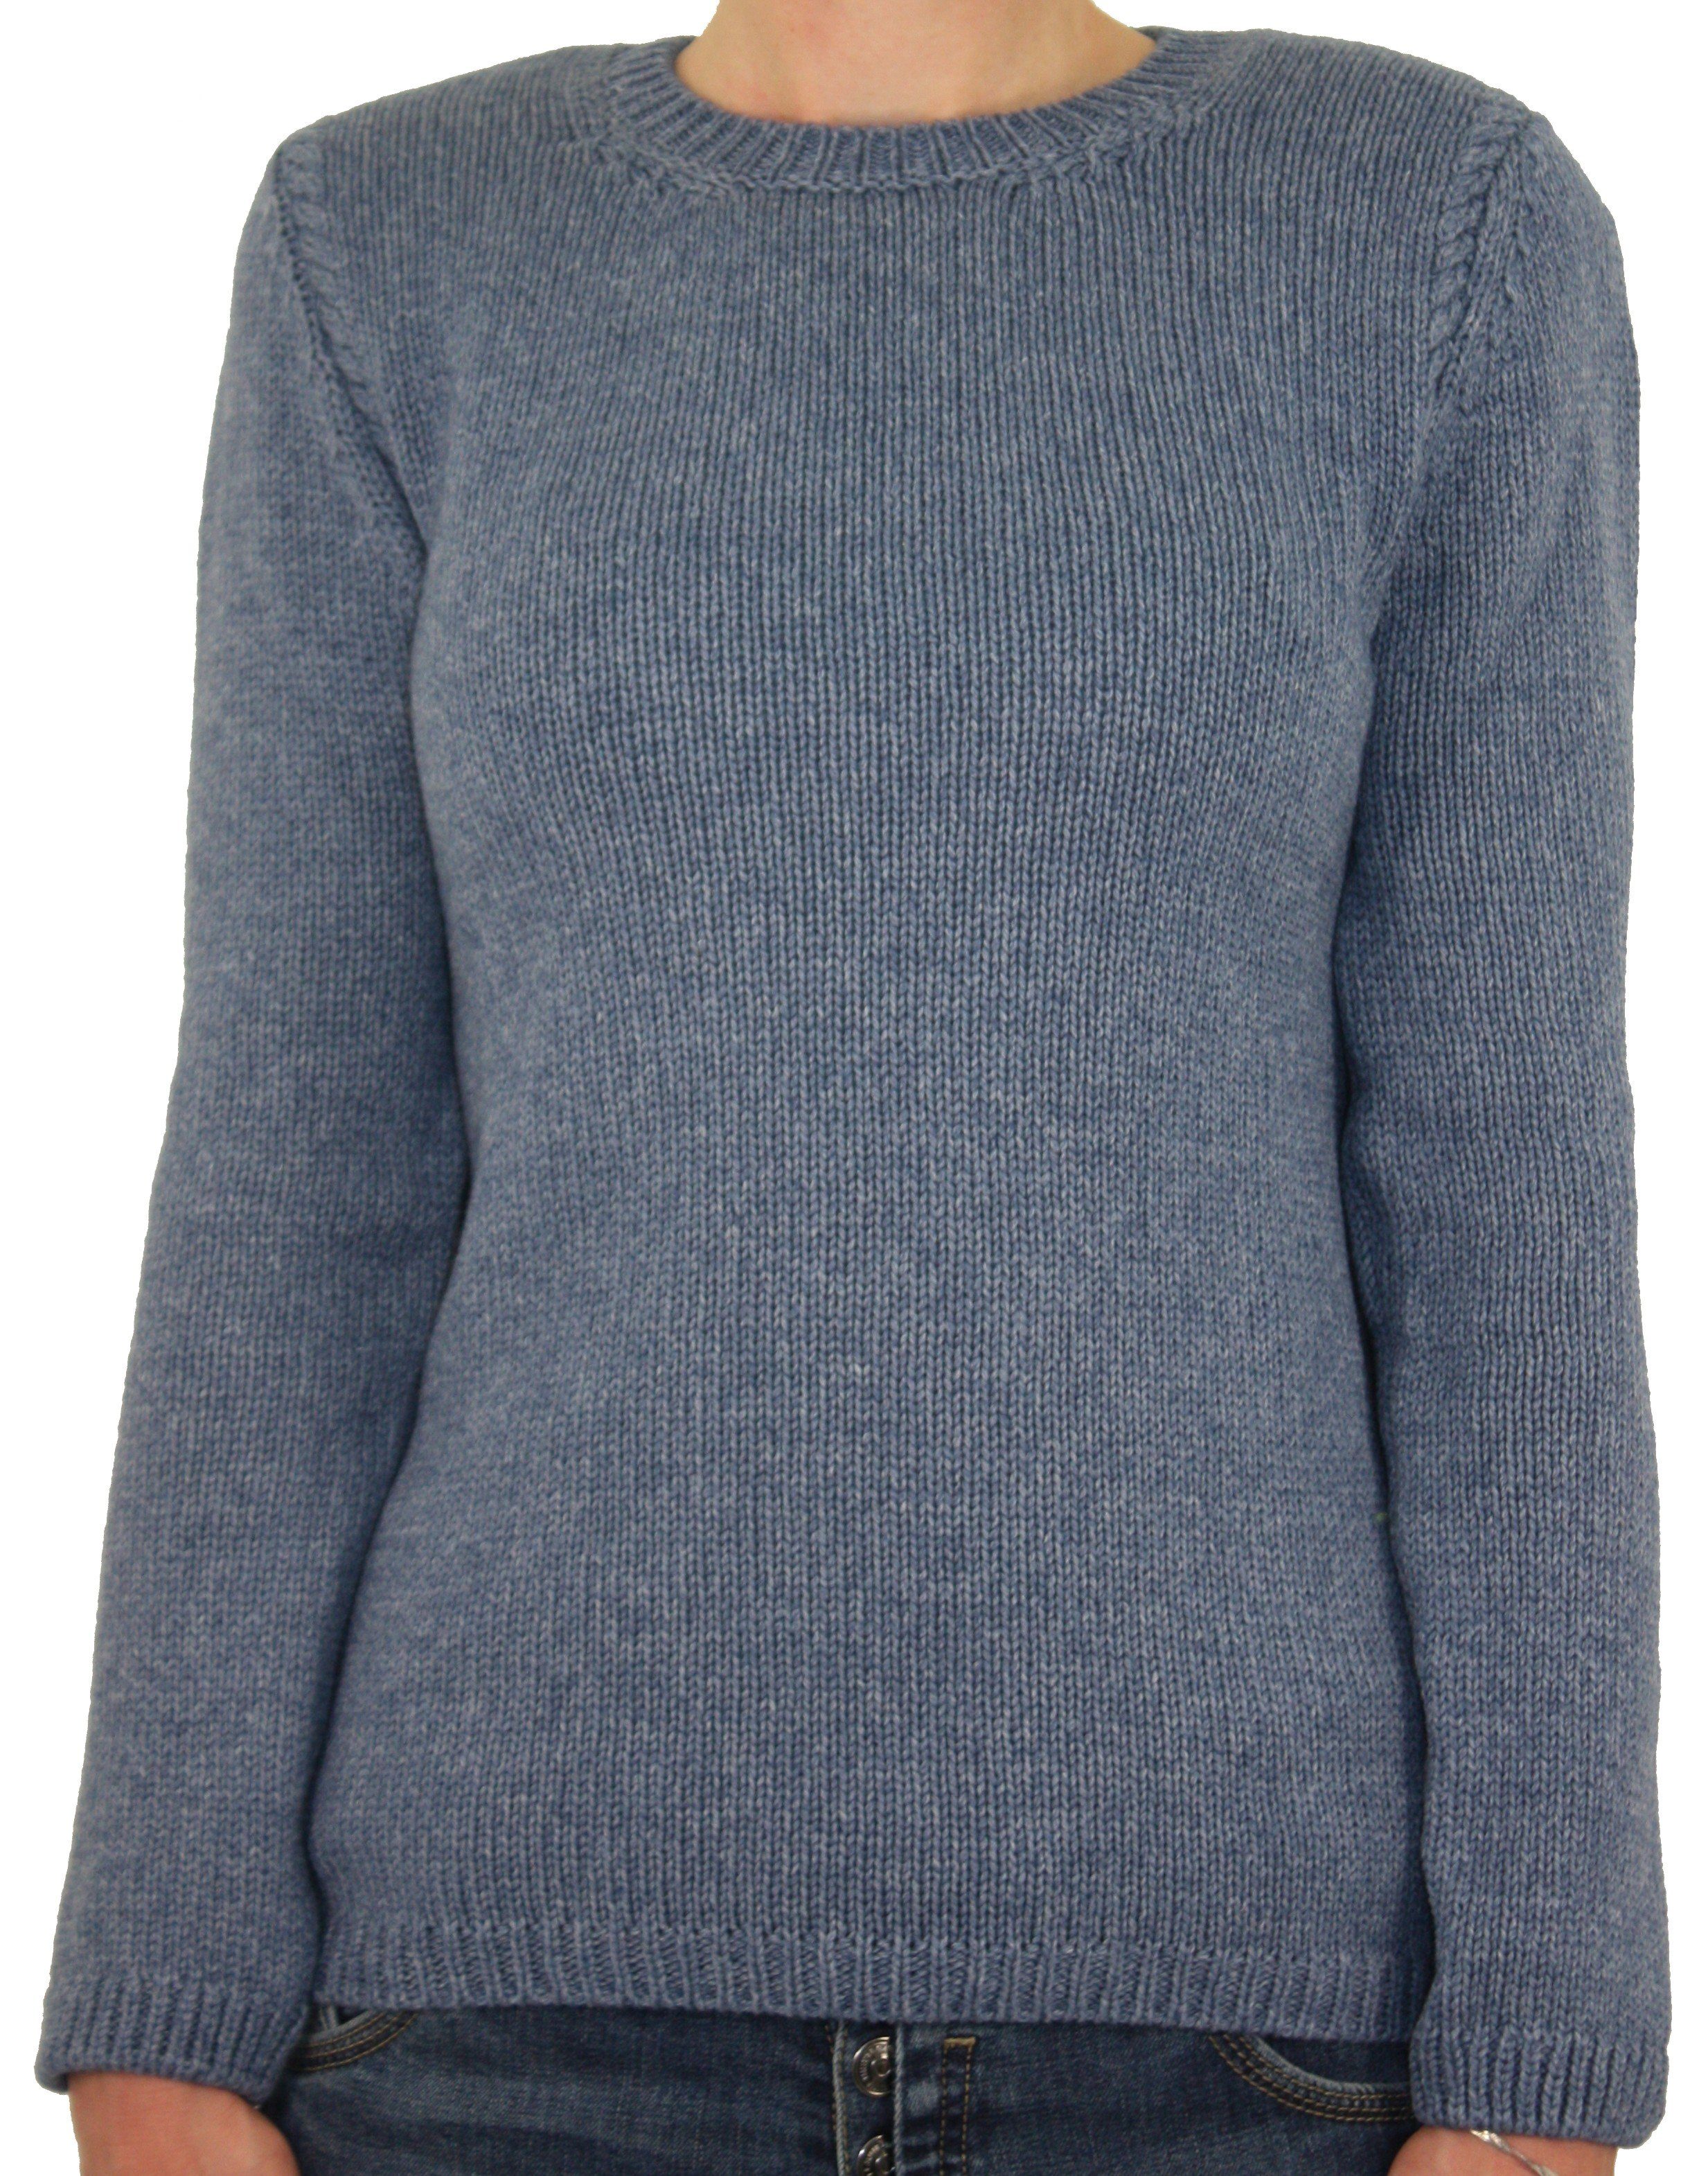 Irelandseye Wollpullover Lahinch Jersey blue Sweater Women Neck Round Cable wave